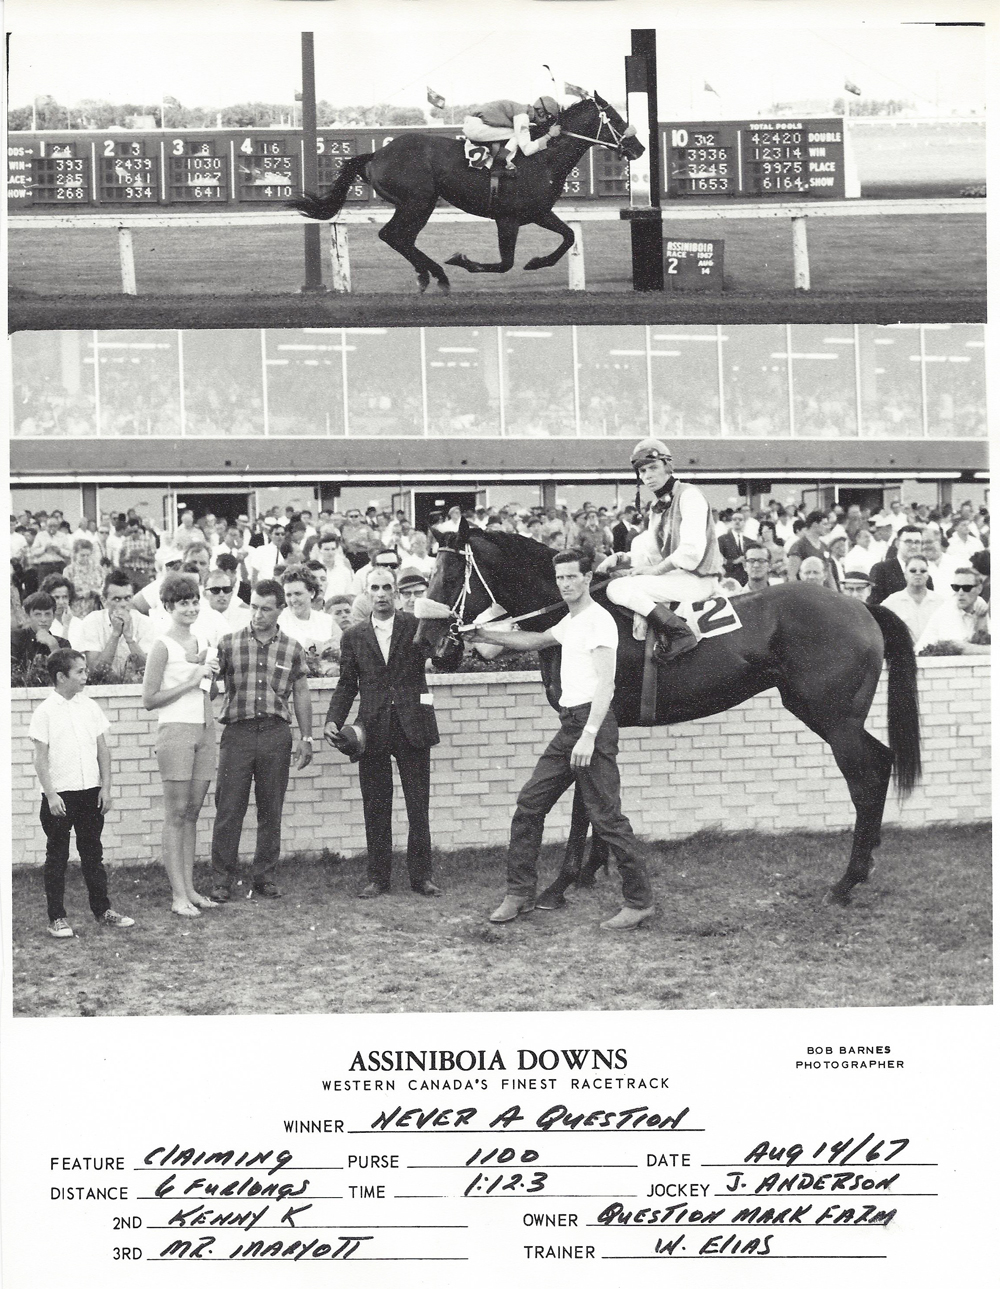 Never A Question wins at ASD on August 14, 1967.